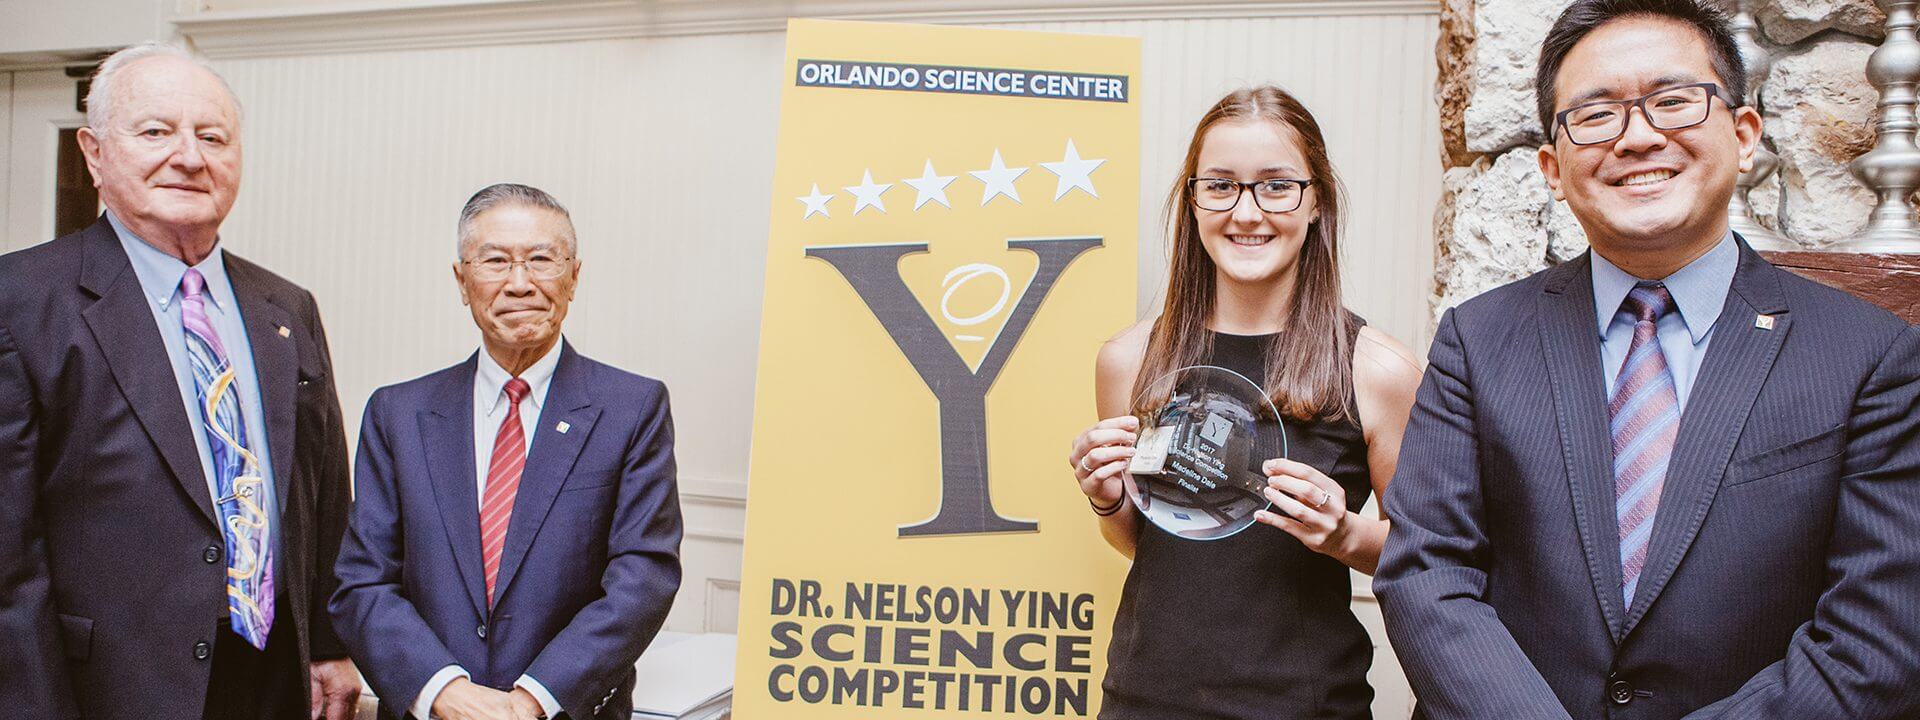 A high school student smiles with her award at the Dr. Nelson Ying Science Competition.